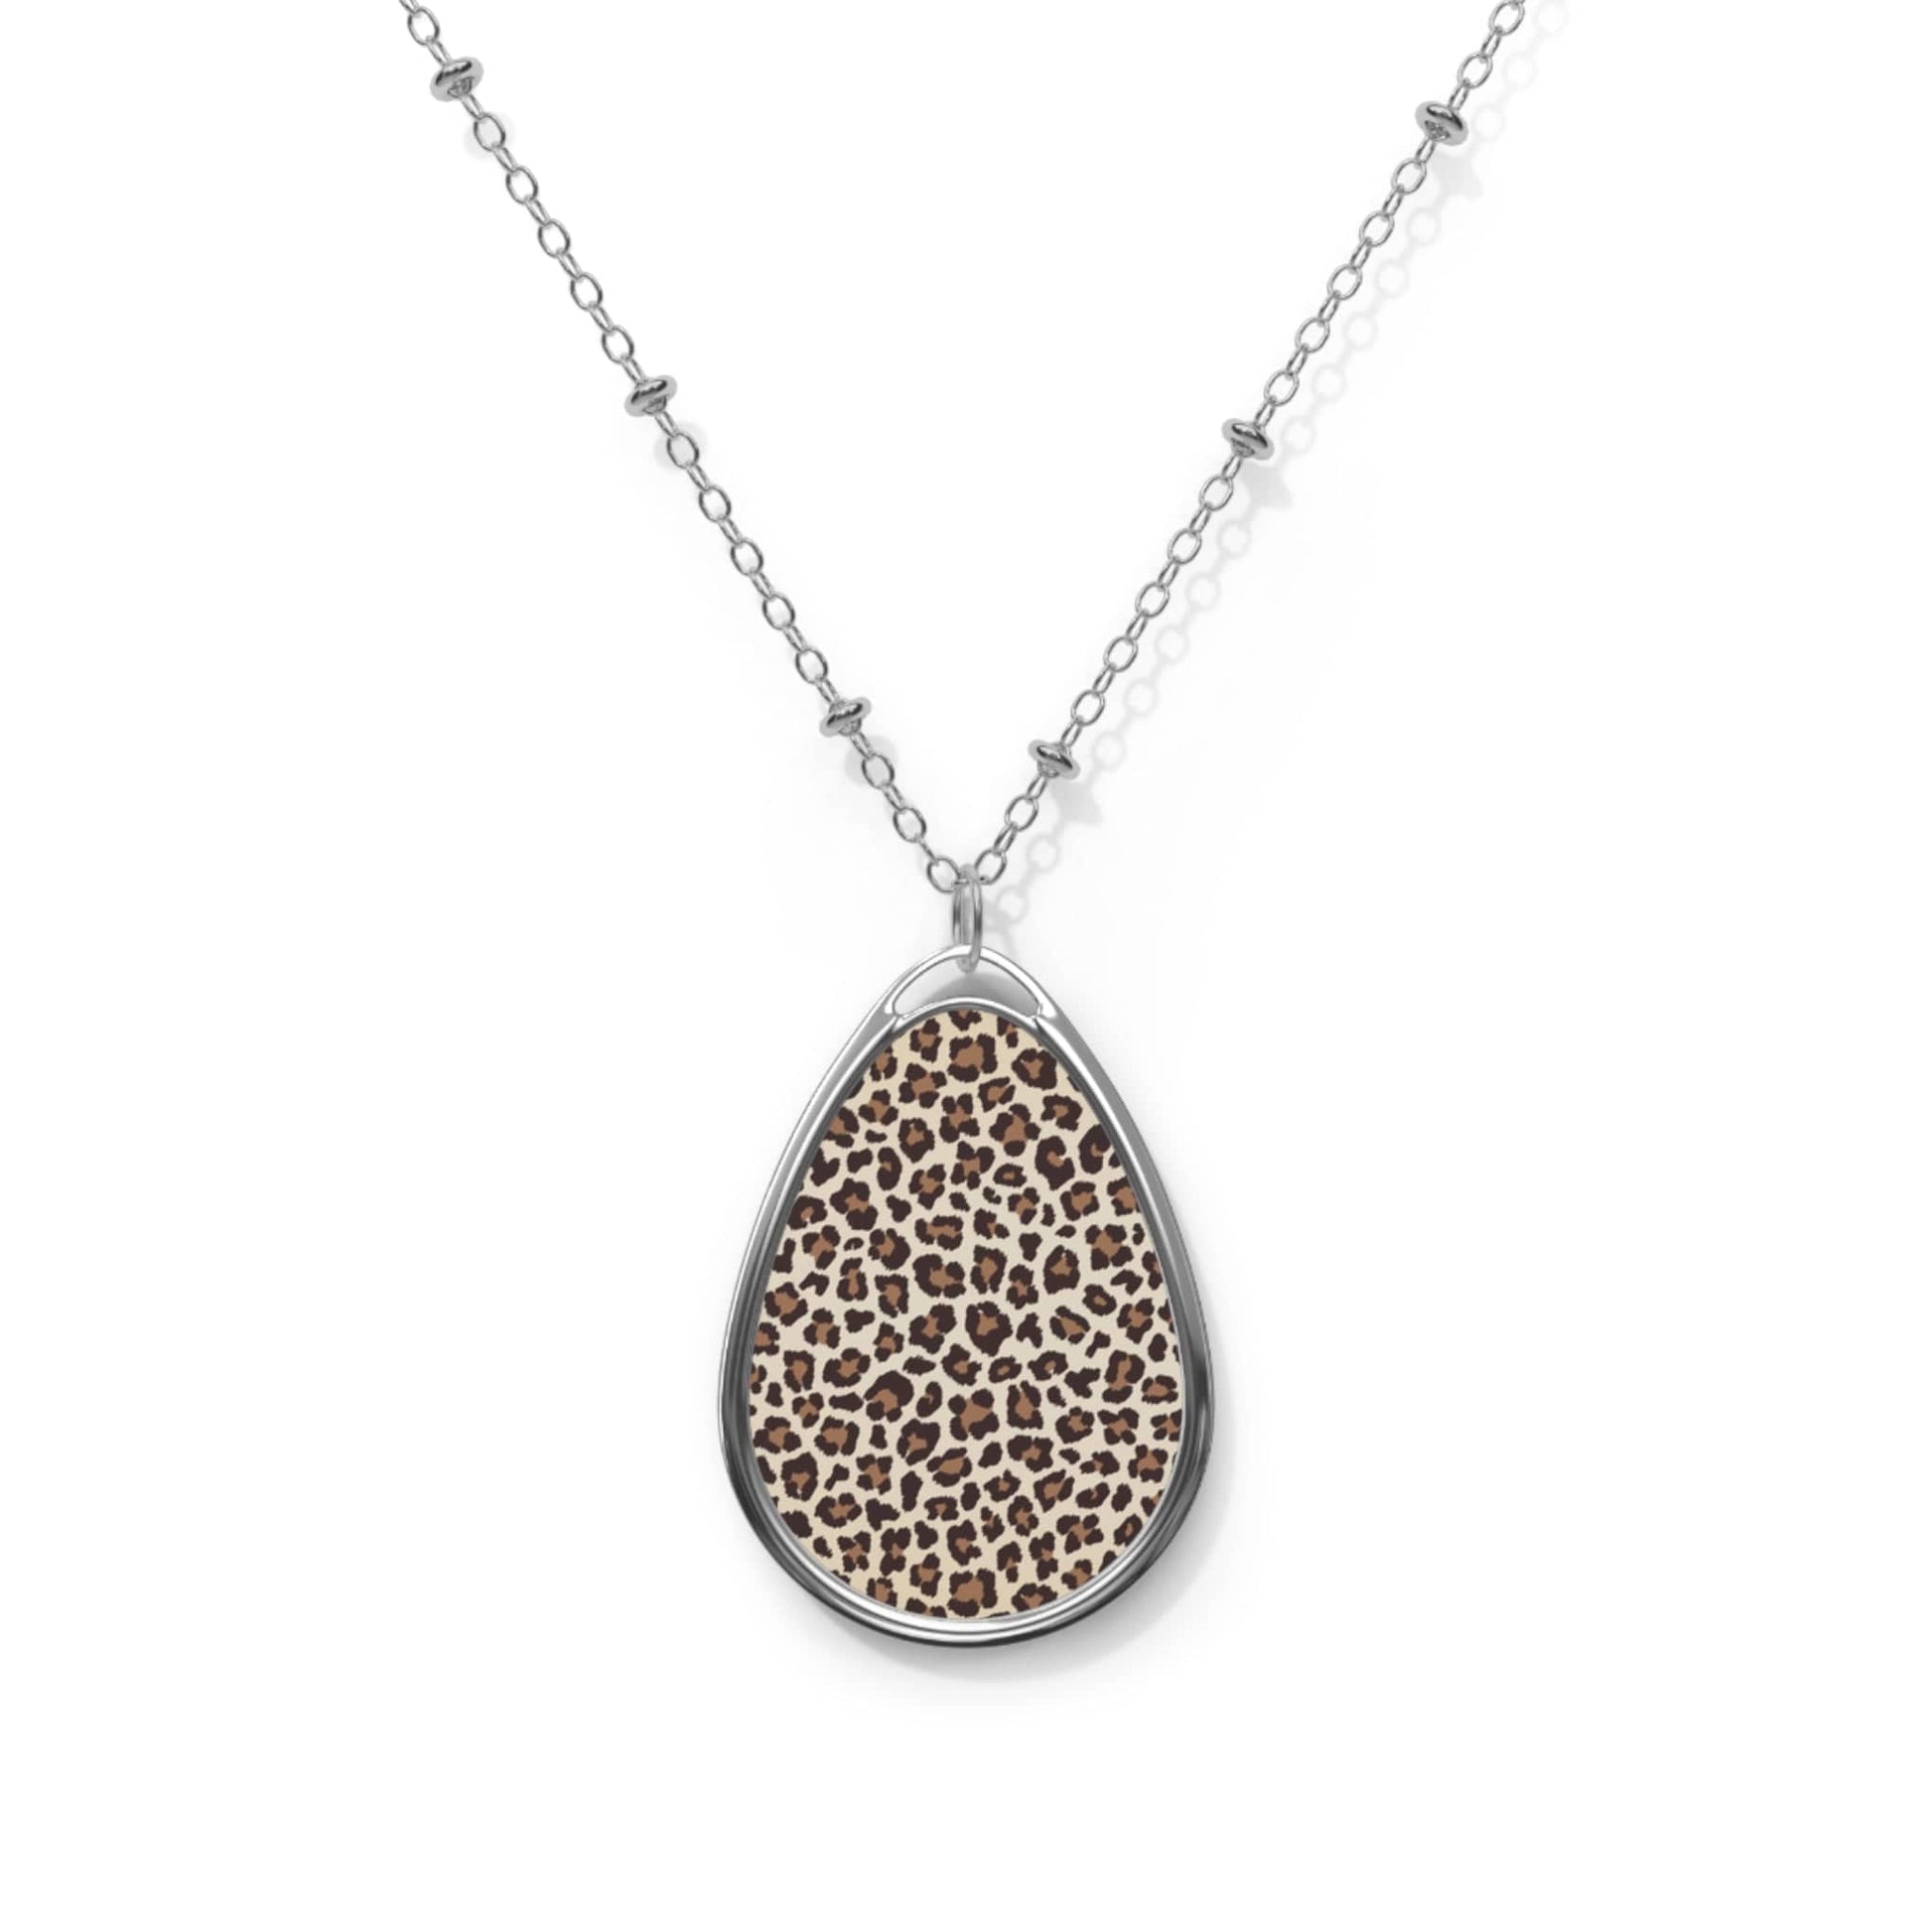 Leopard - Oval Necklace One Size / Silver